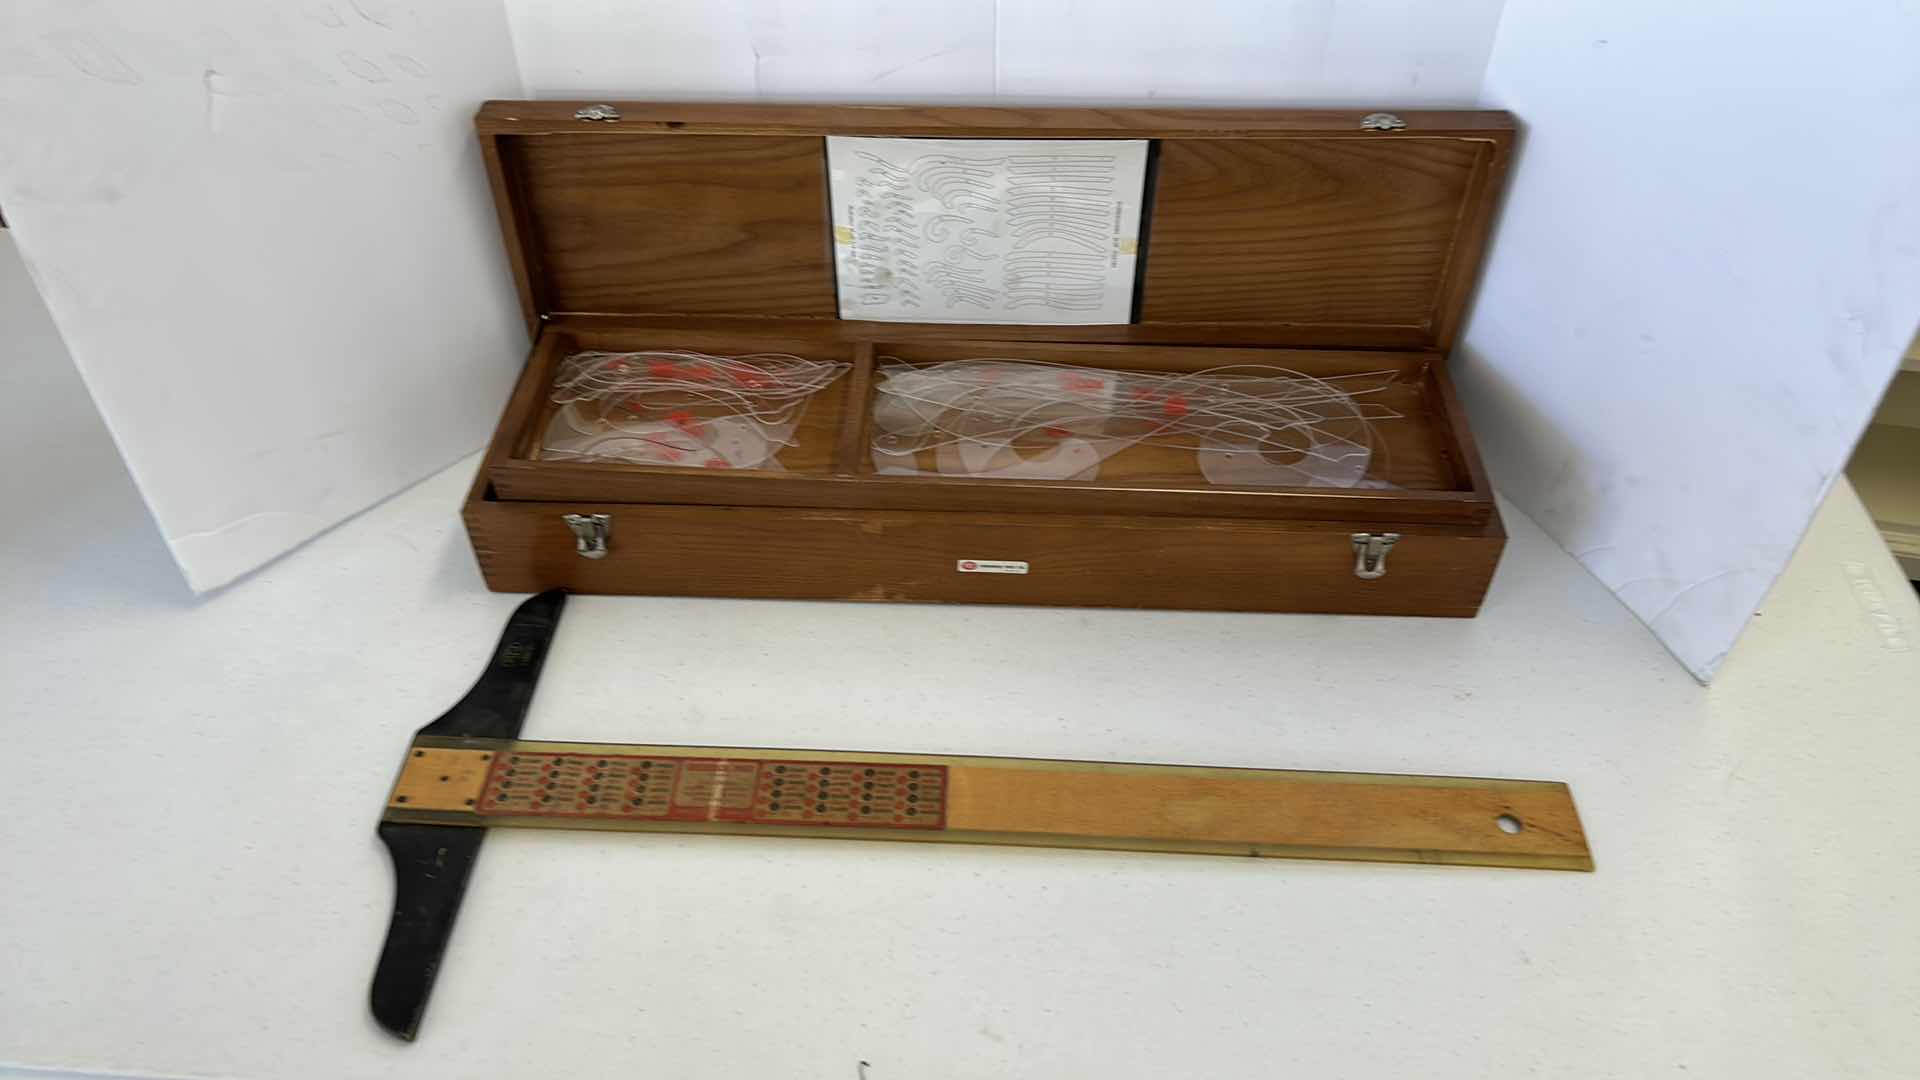 Photo 8 of RARE VINTAGE DRAFTING TOOLS - WOOD BOX W COPENHAGEN SHIP CURVES AND STRAIGHT RULE